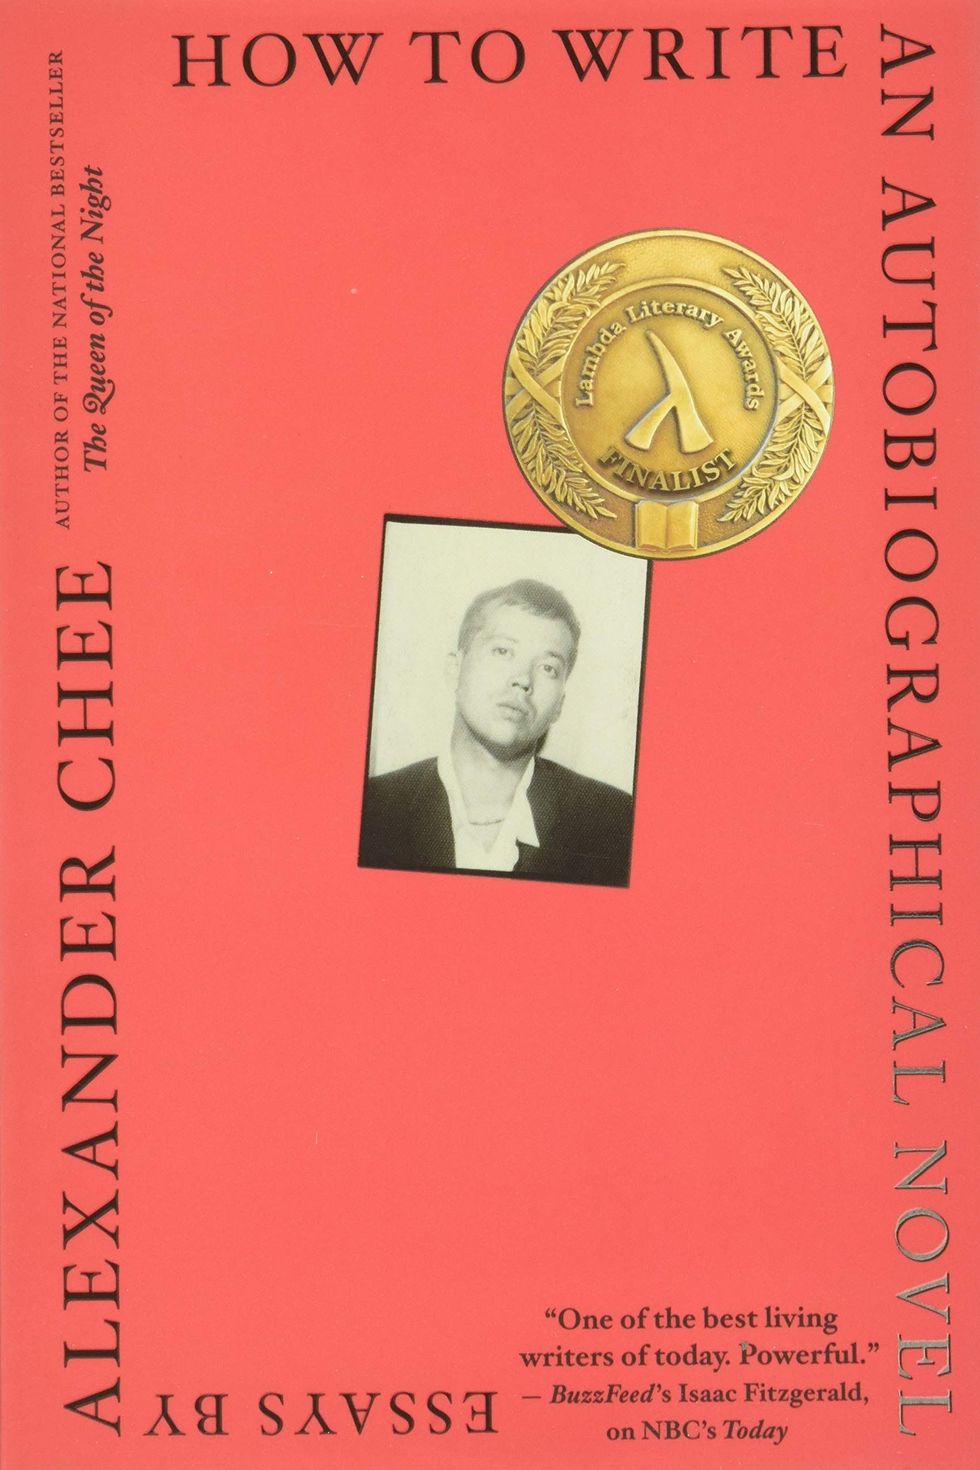 ‘How to Write an Autobiographical Novel: Essays’ by Alexander Chee